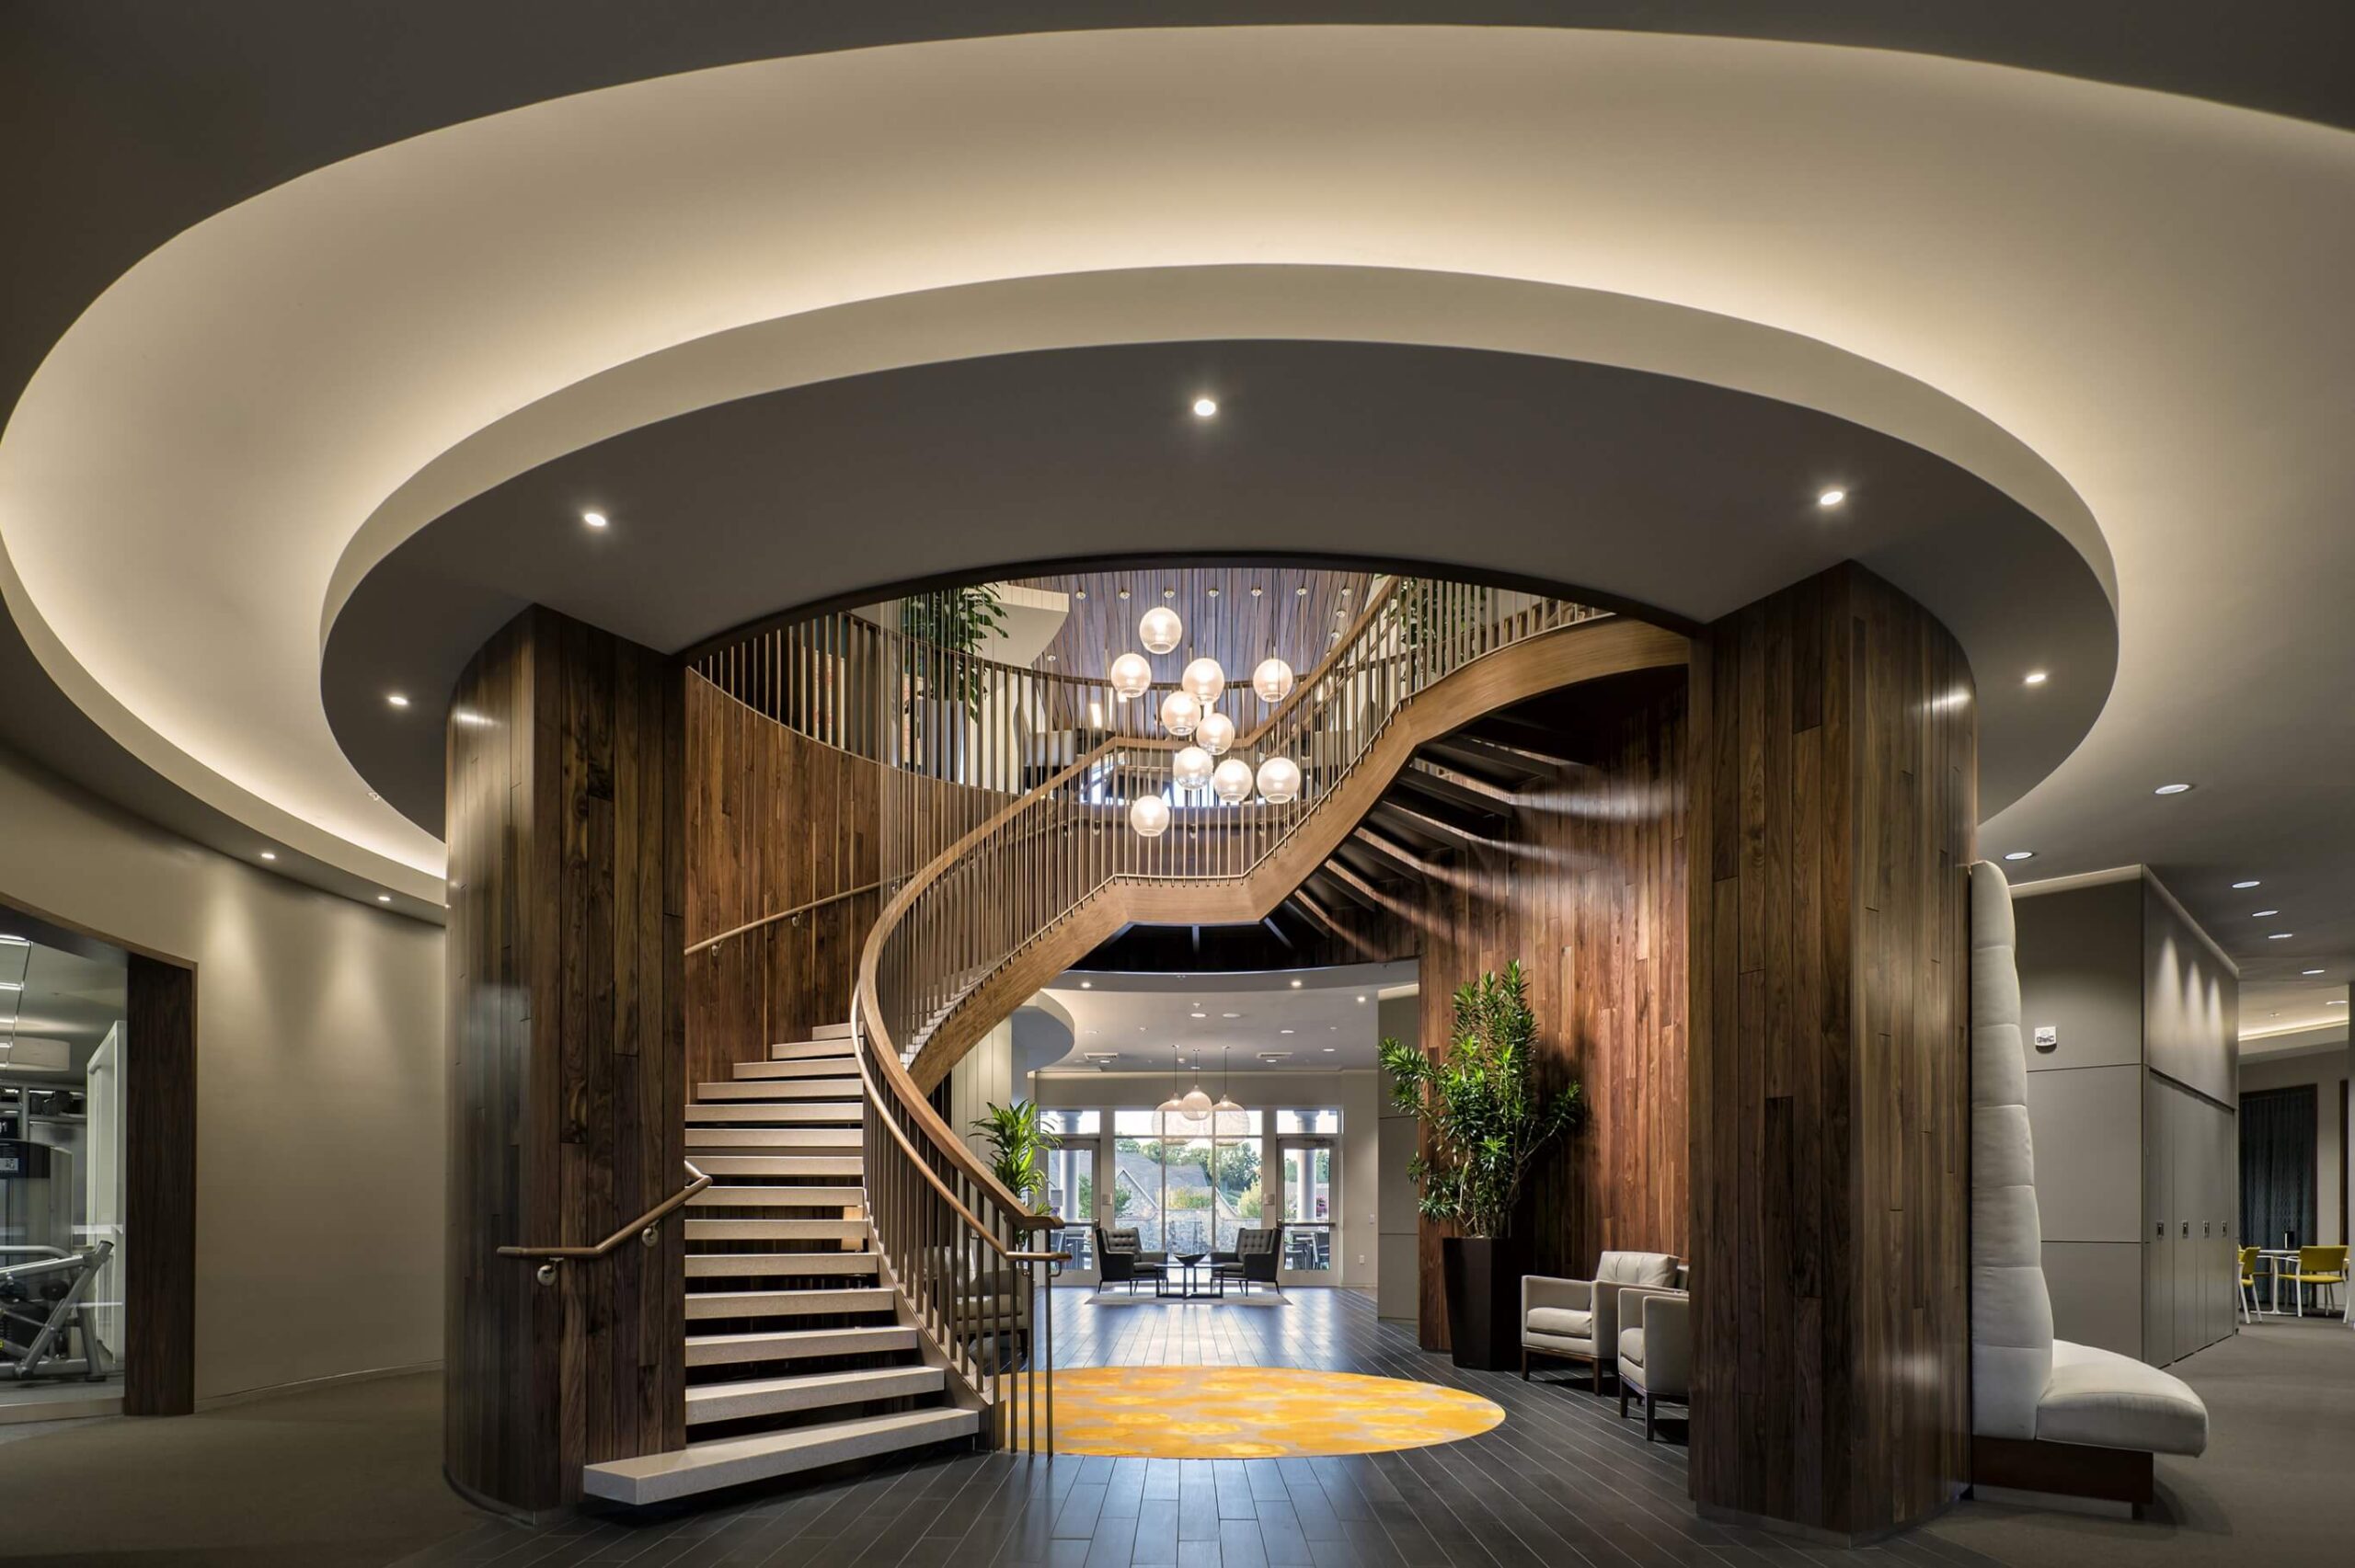 A spiral staircase in a modern office building designed for 55+ independent living.